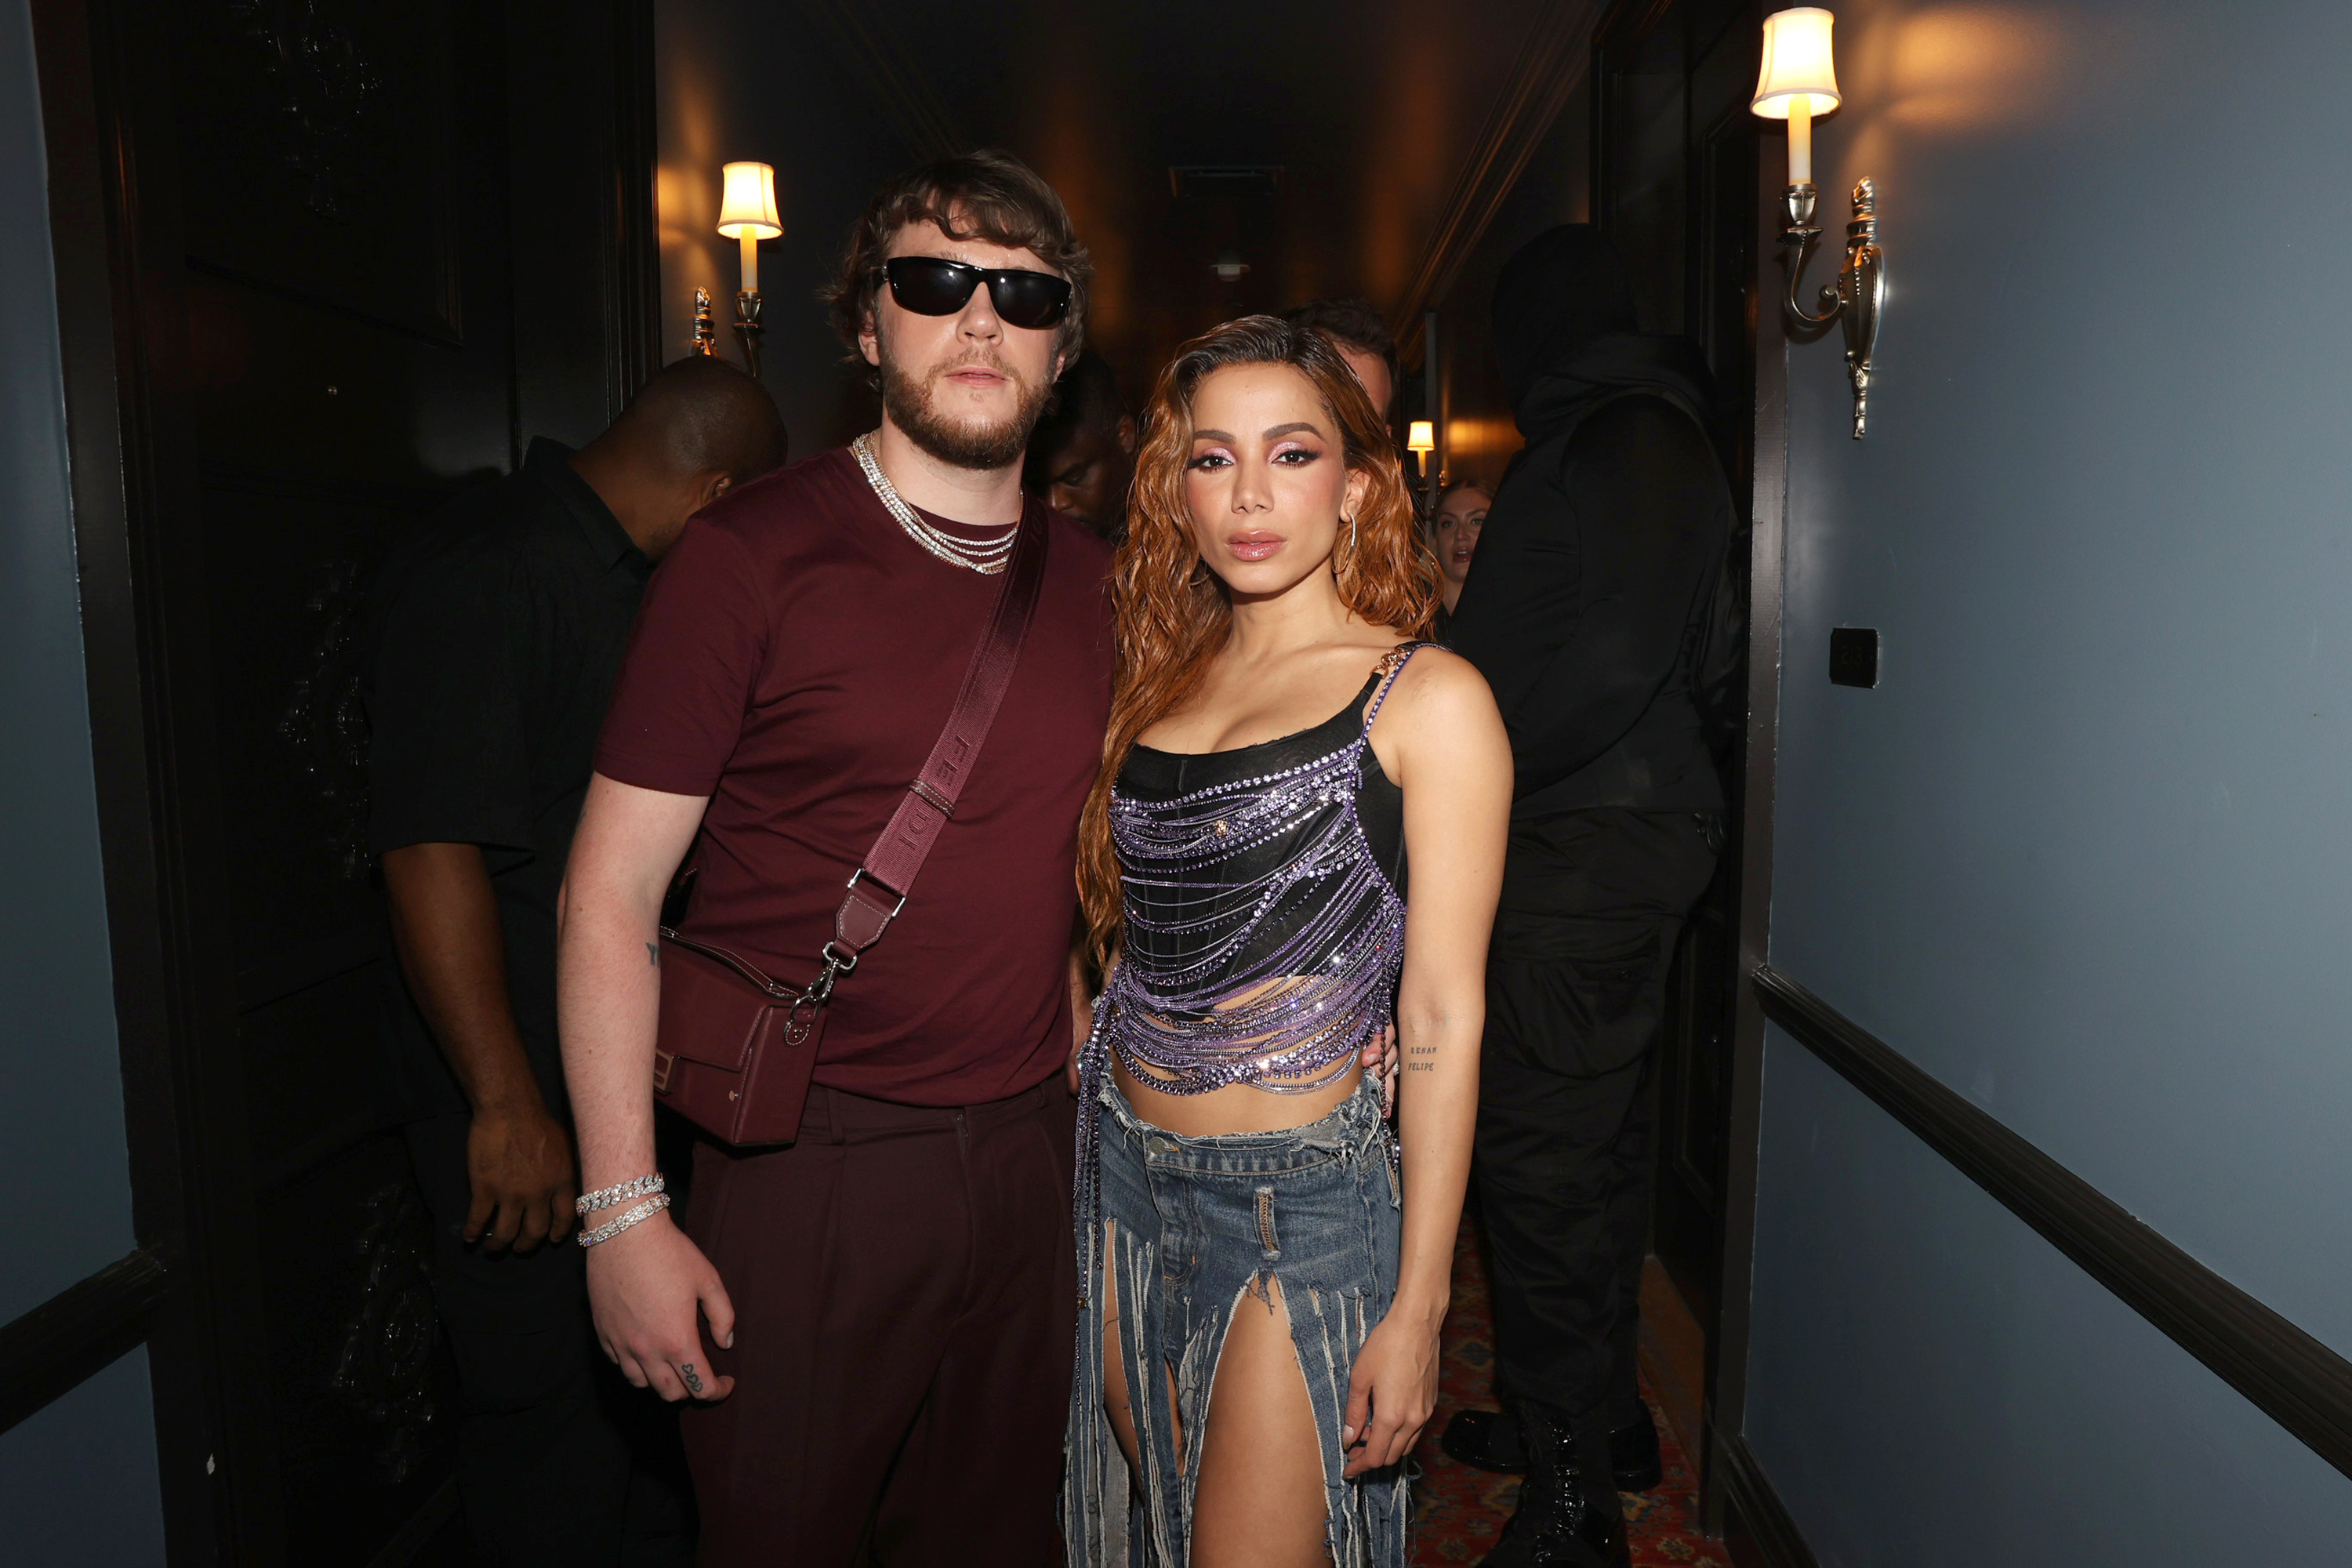 Murda Beatz and Anitta at the Offset X Code Single Release Party in August 2022, in New York City. | Source: Getty Images